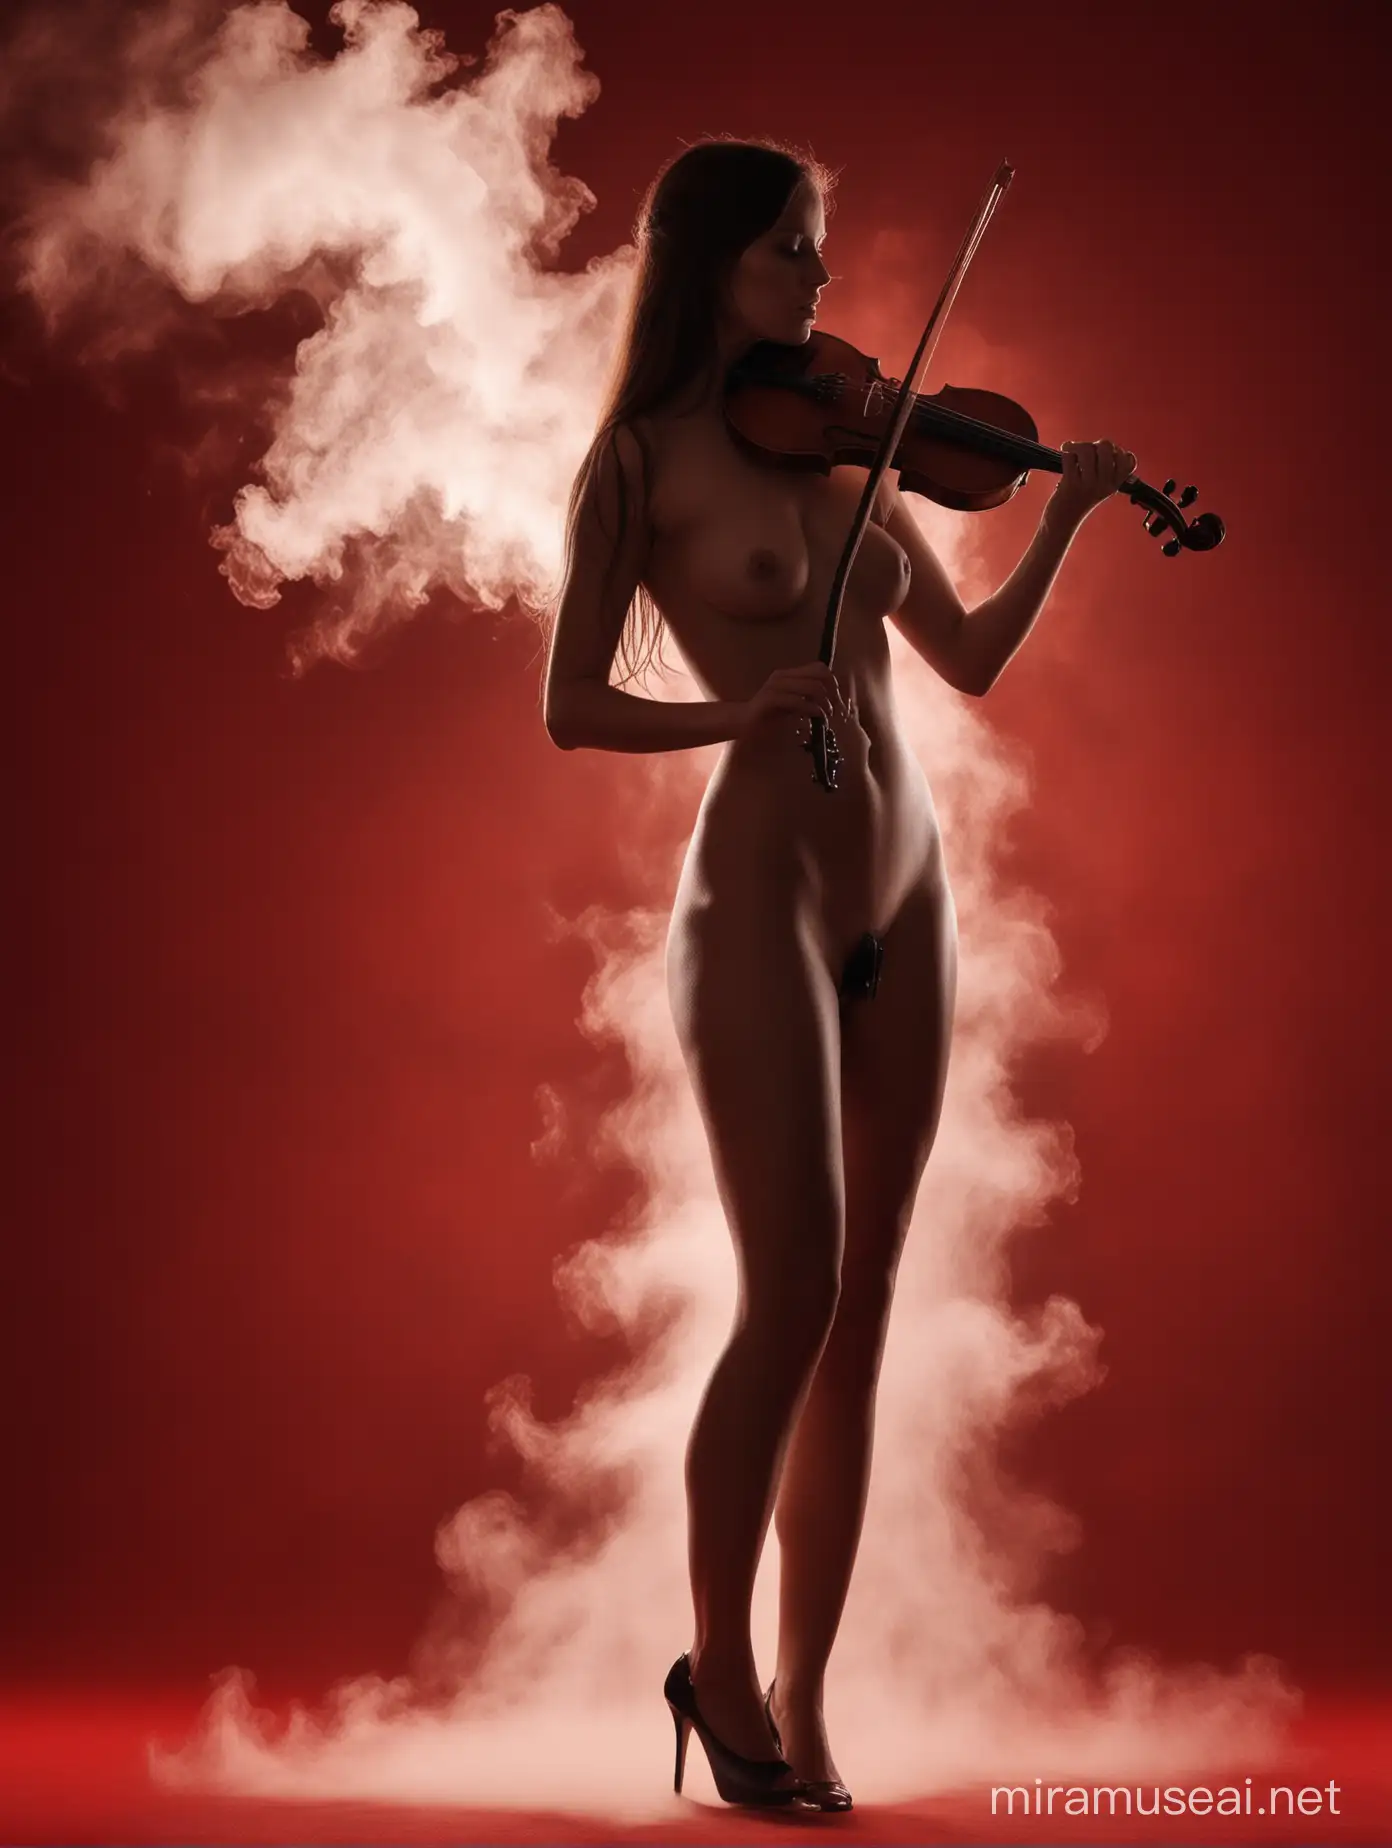 Sensual Nude Woman Playing Violin in Enigmatic Red Atmosphere